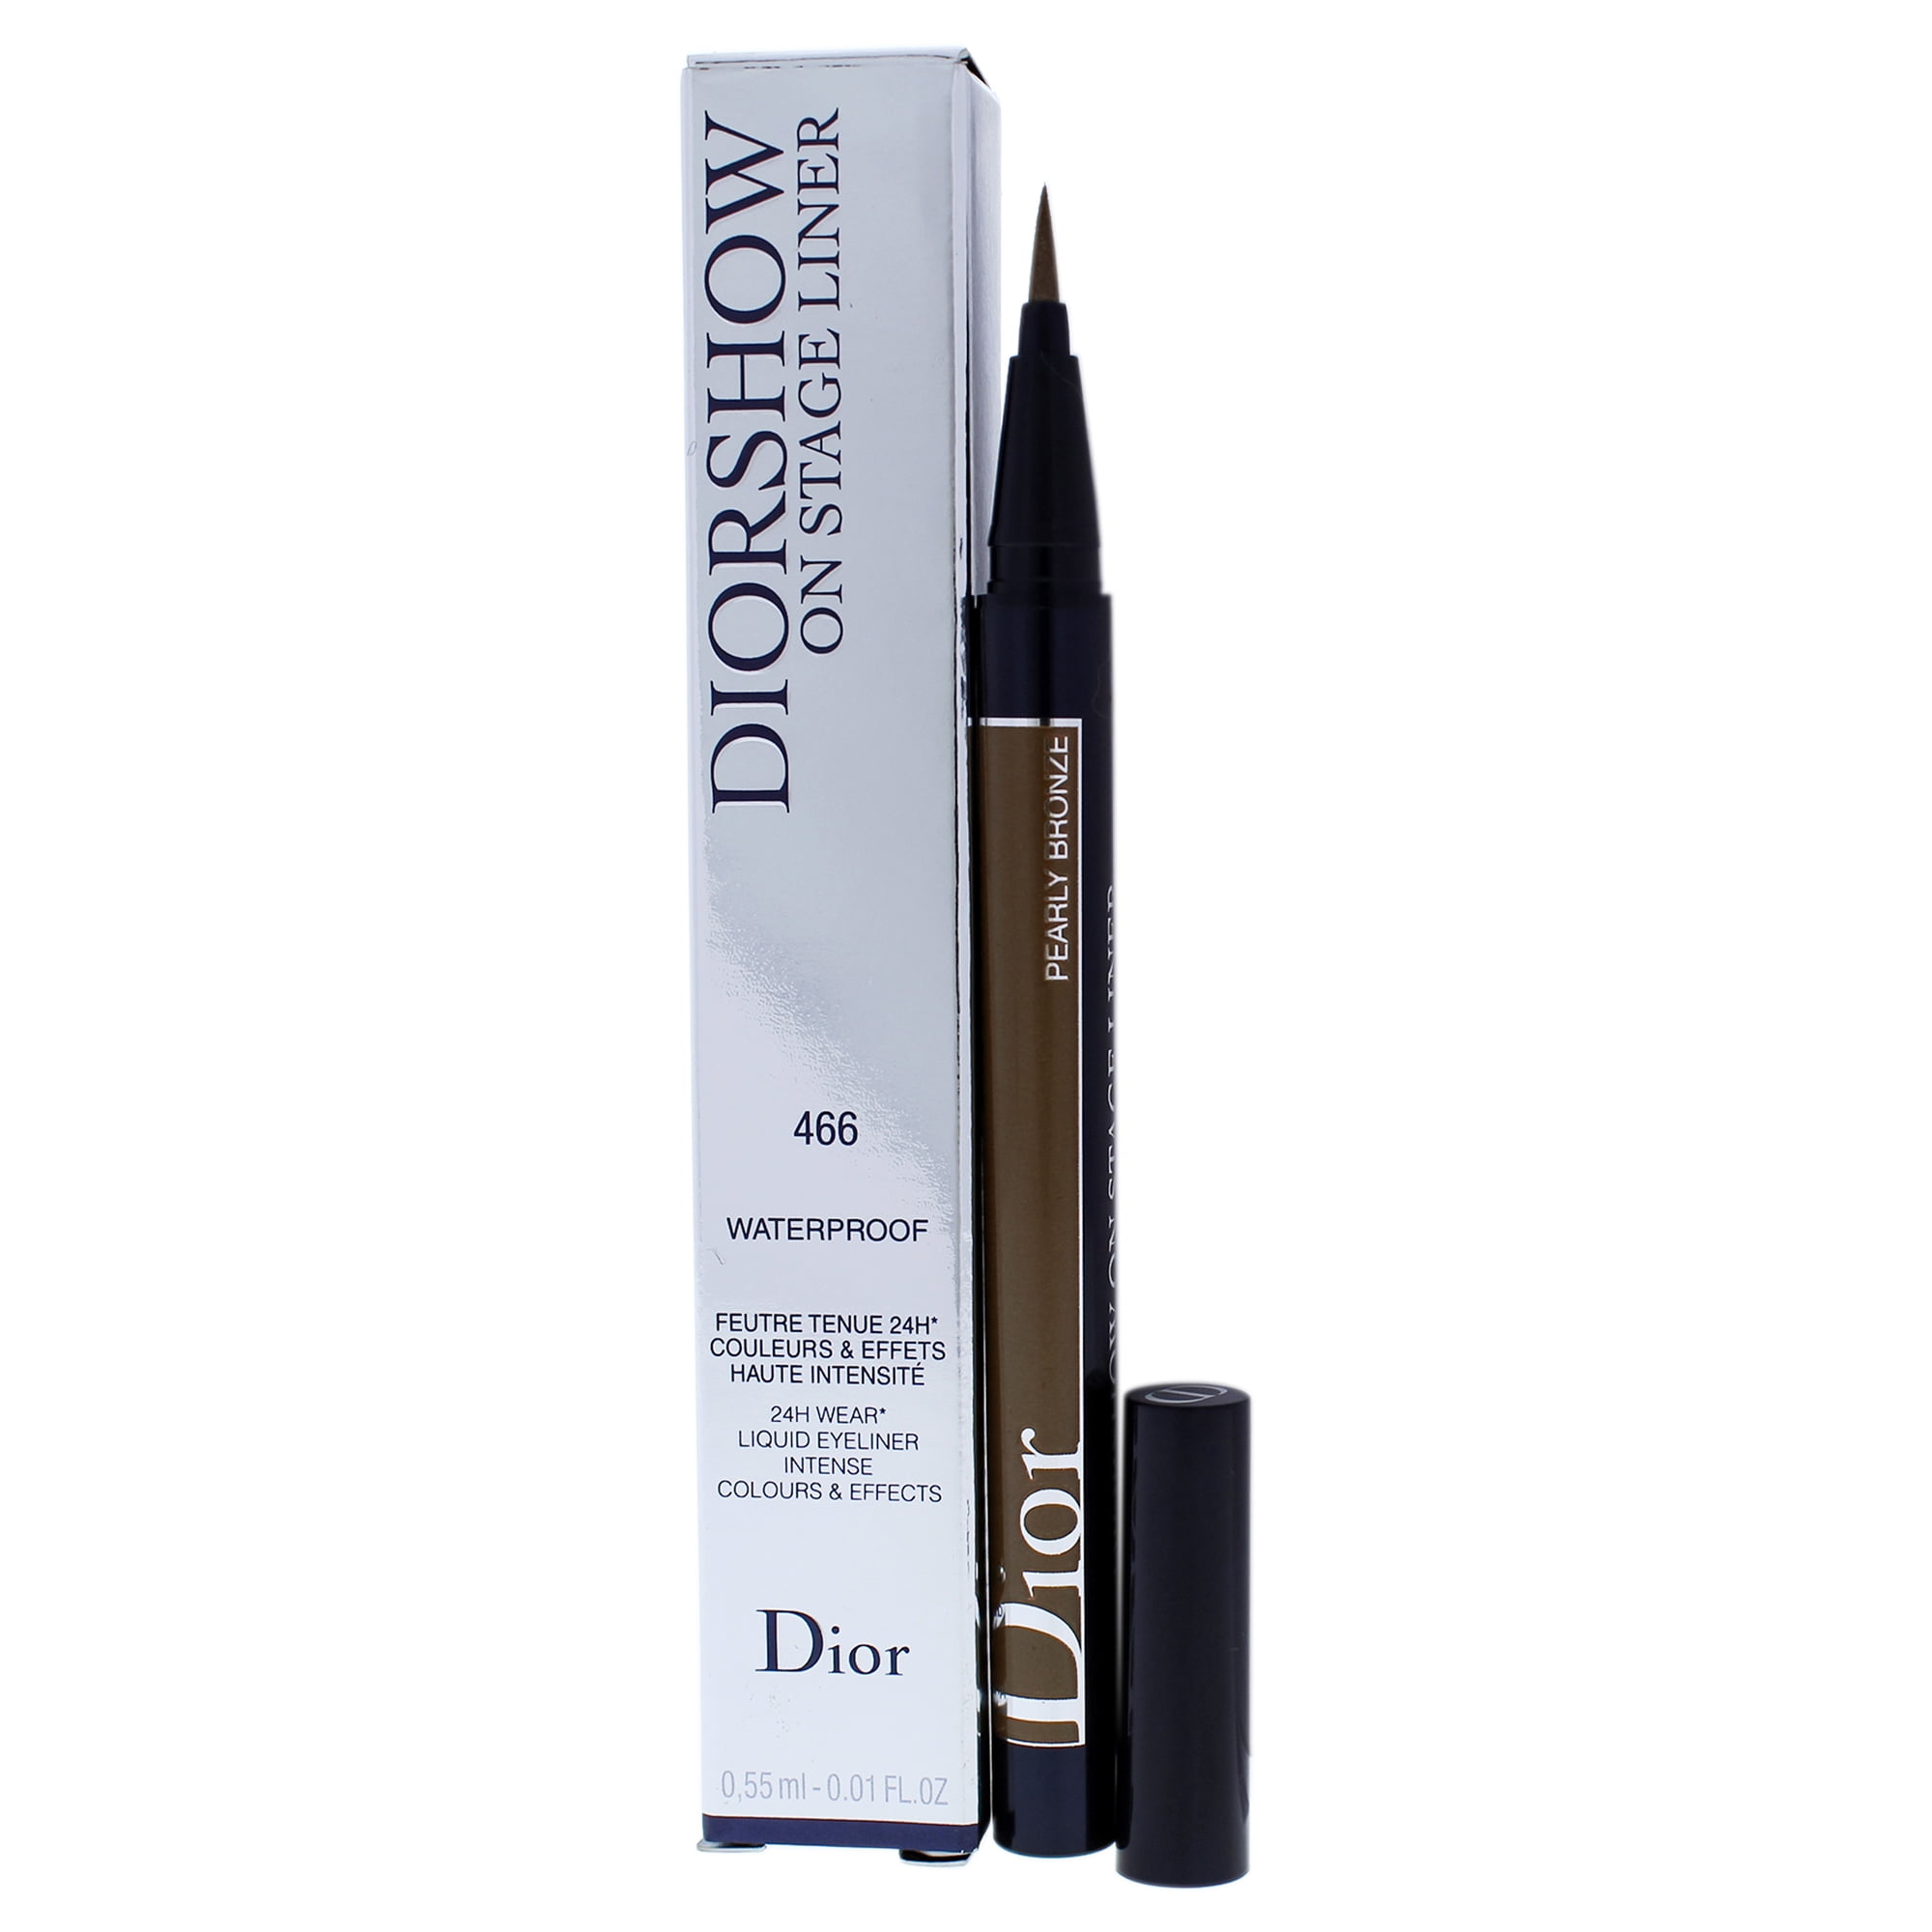 Dior - Diorshow On Stage Liquid Eyeliner - 466 Pearly Bronze by